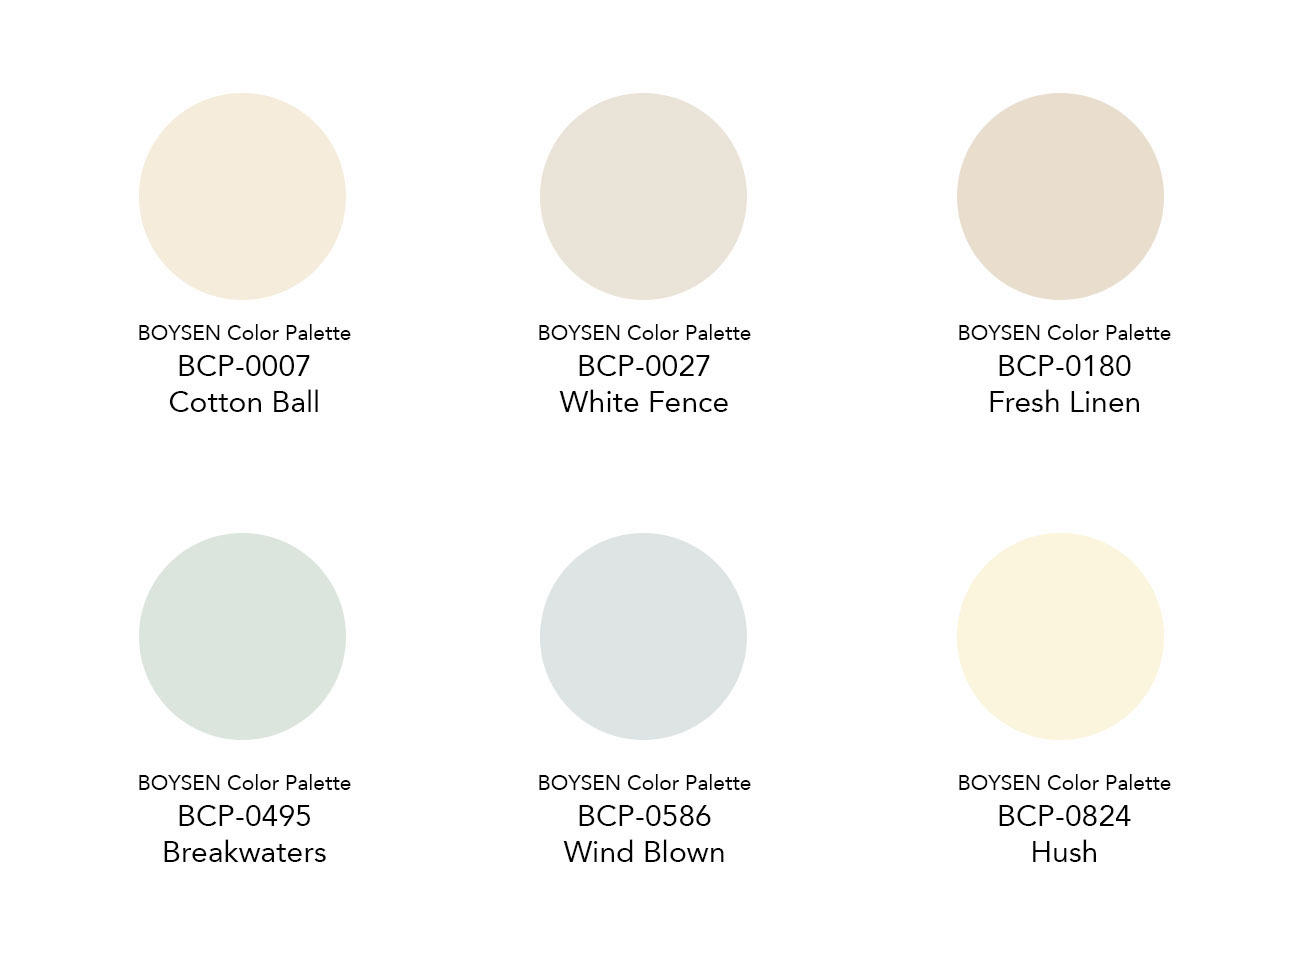 Going Color Mad? Here are No-Fail Home Paint Colors to Pick From | MyBoysen